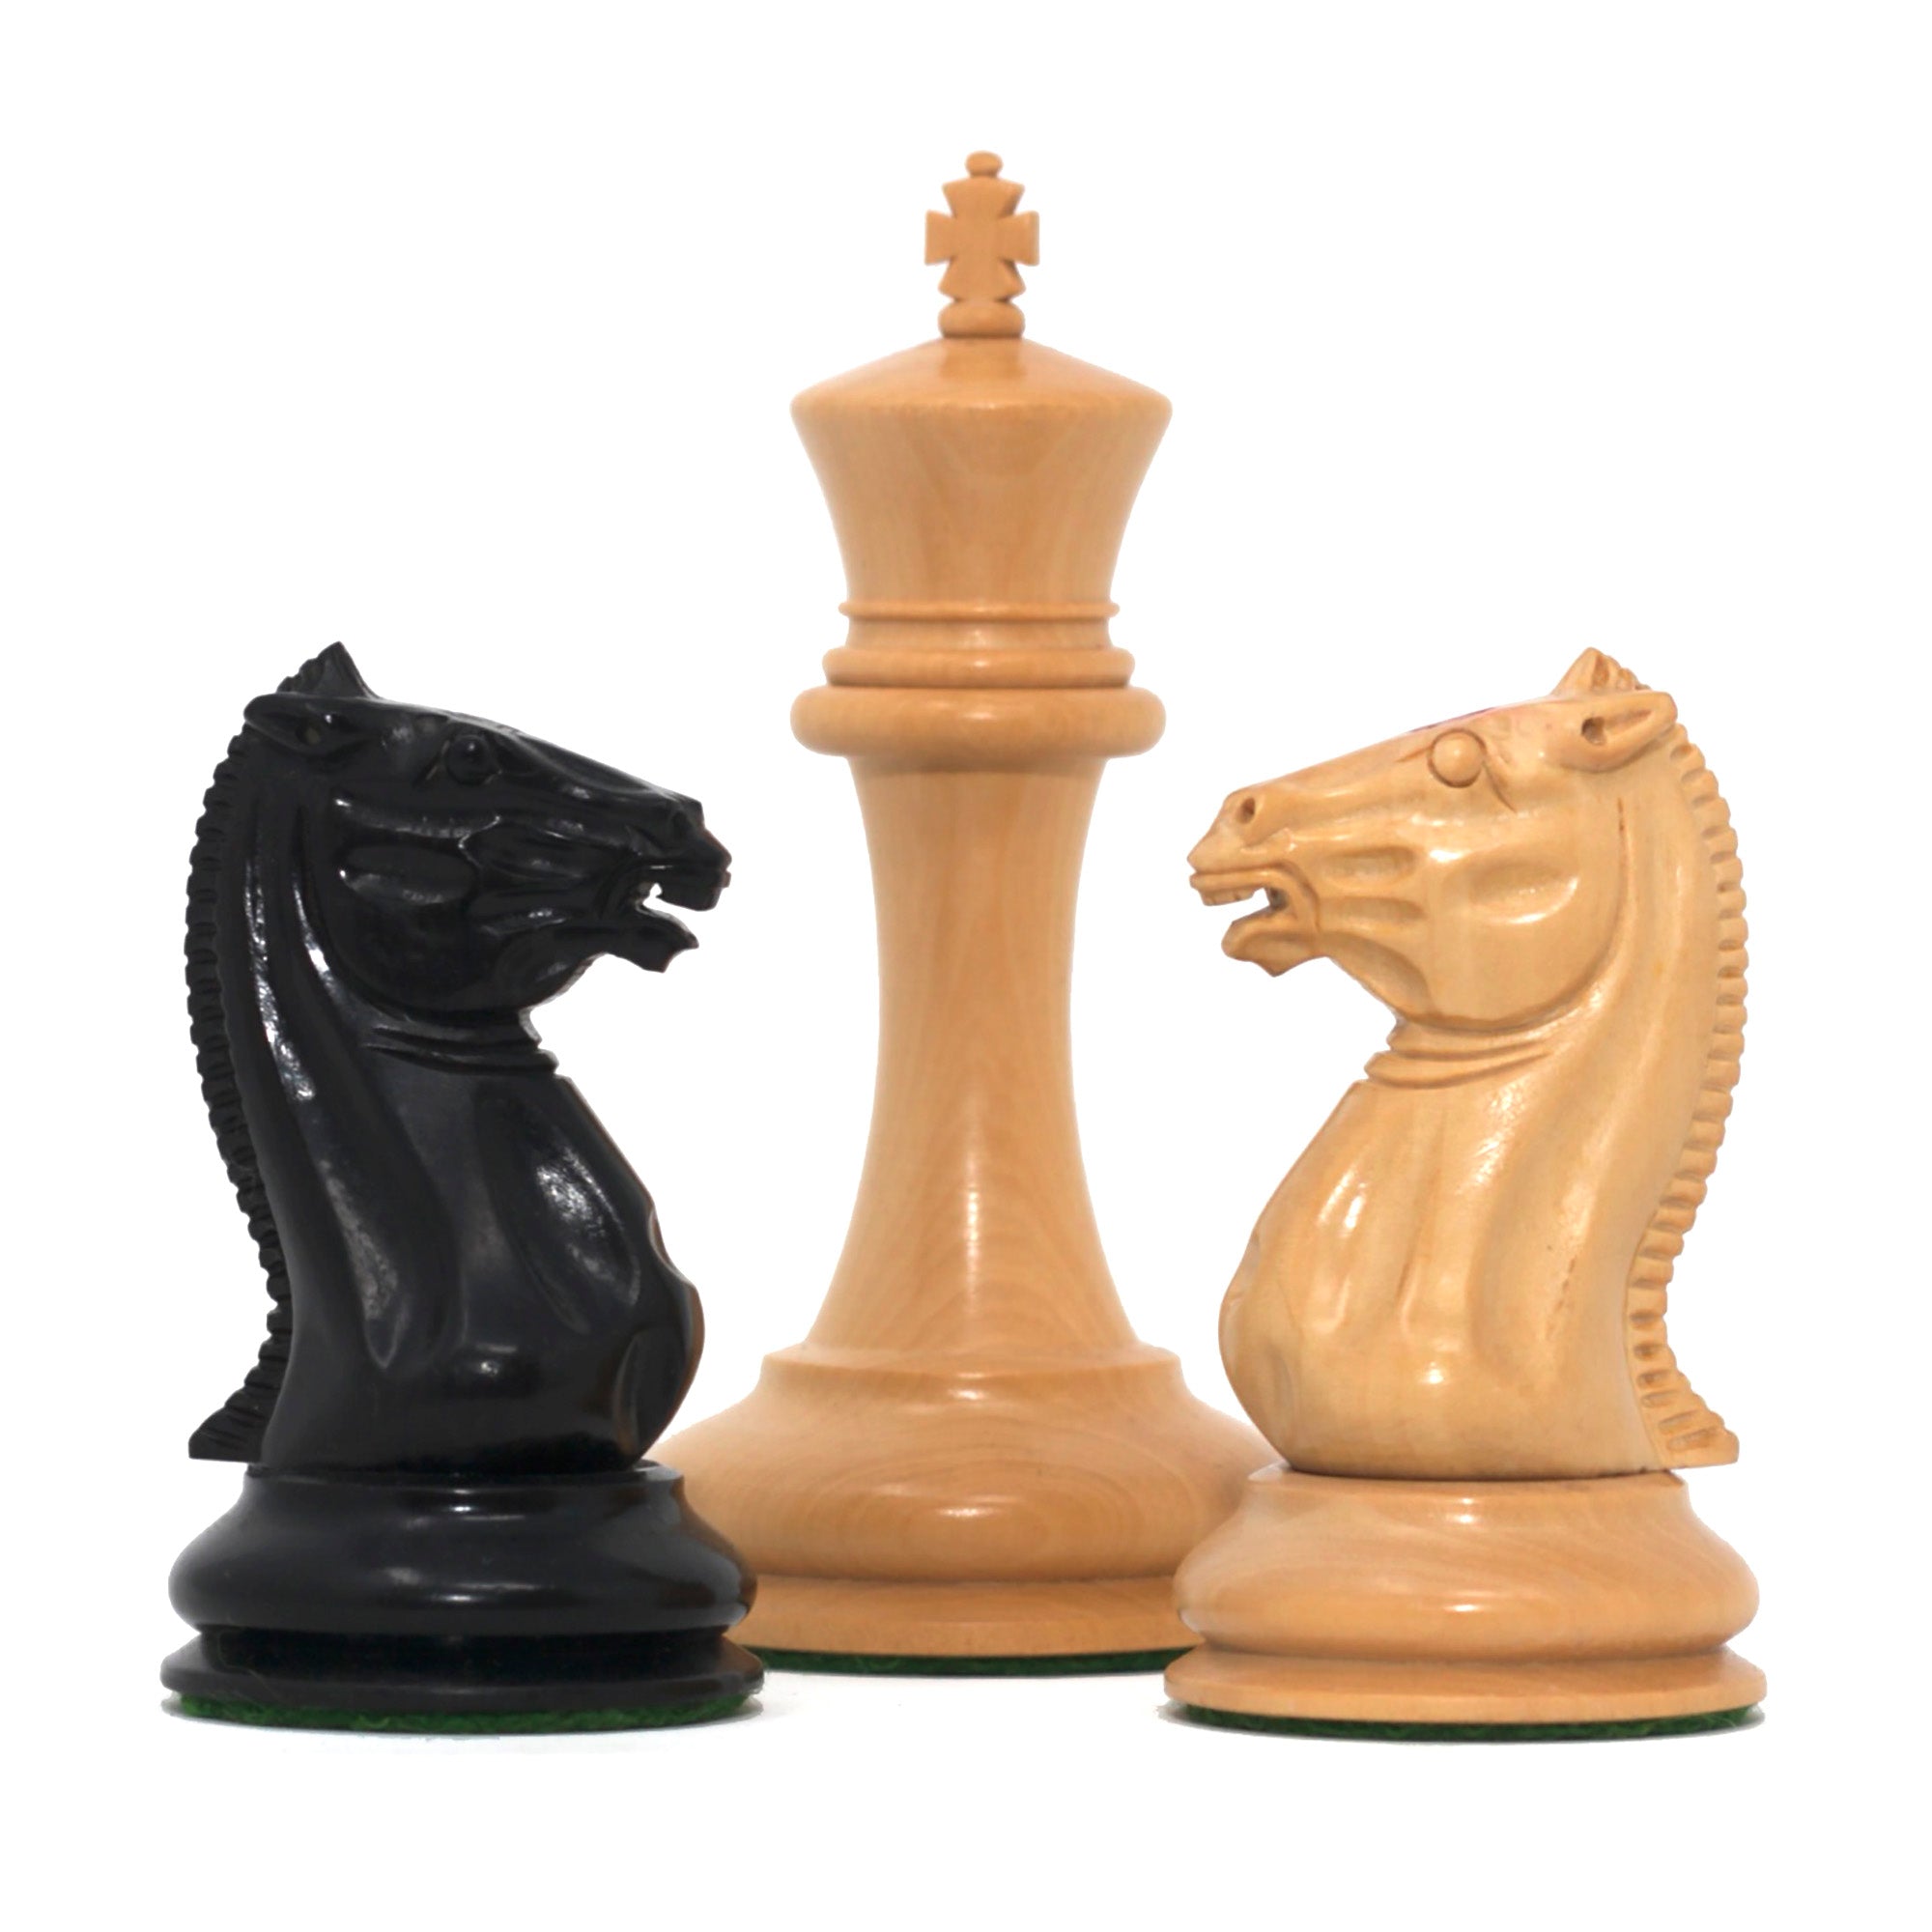 Morphy Cooke 1849-50 Vintage 3.5" Reproduction Chess Set in Non-Antiqued Boxwood & Ebony